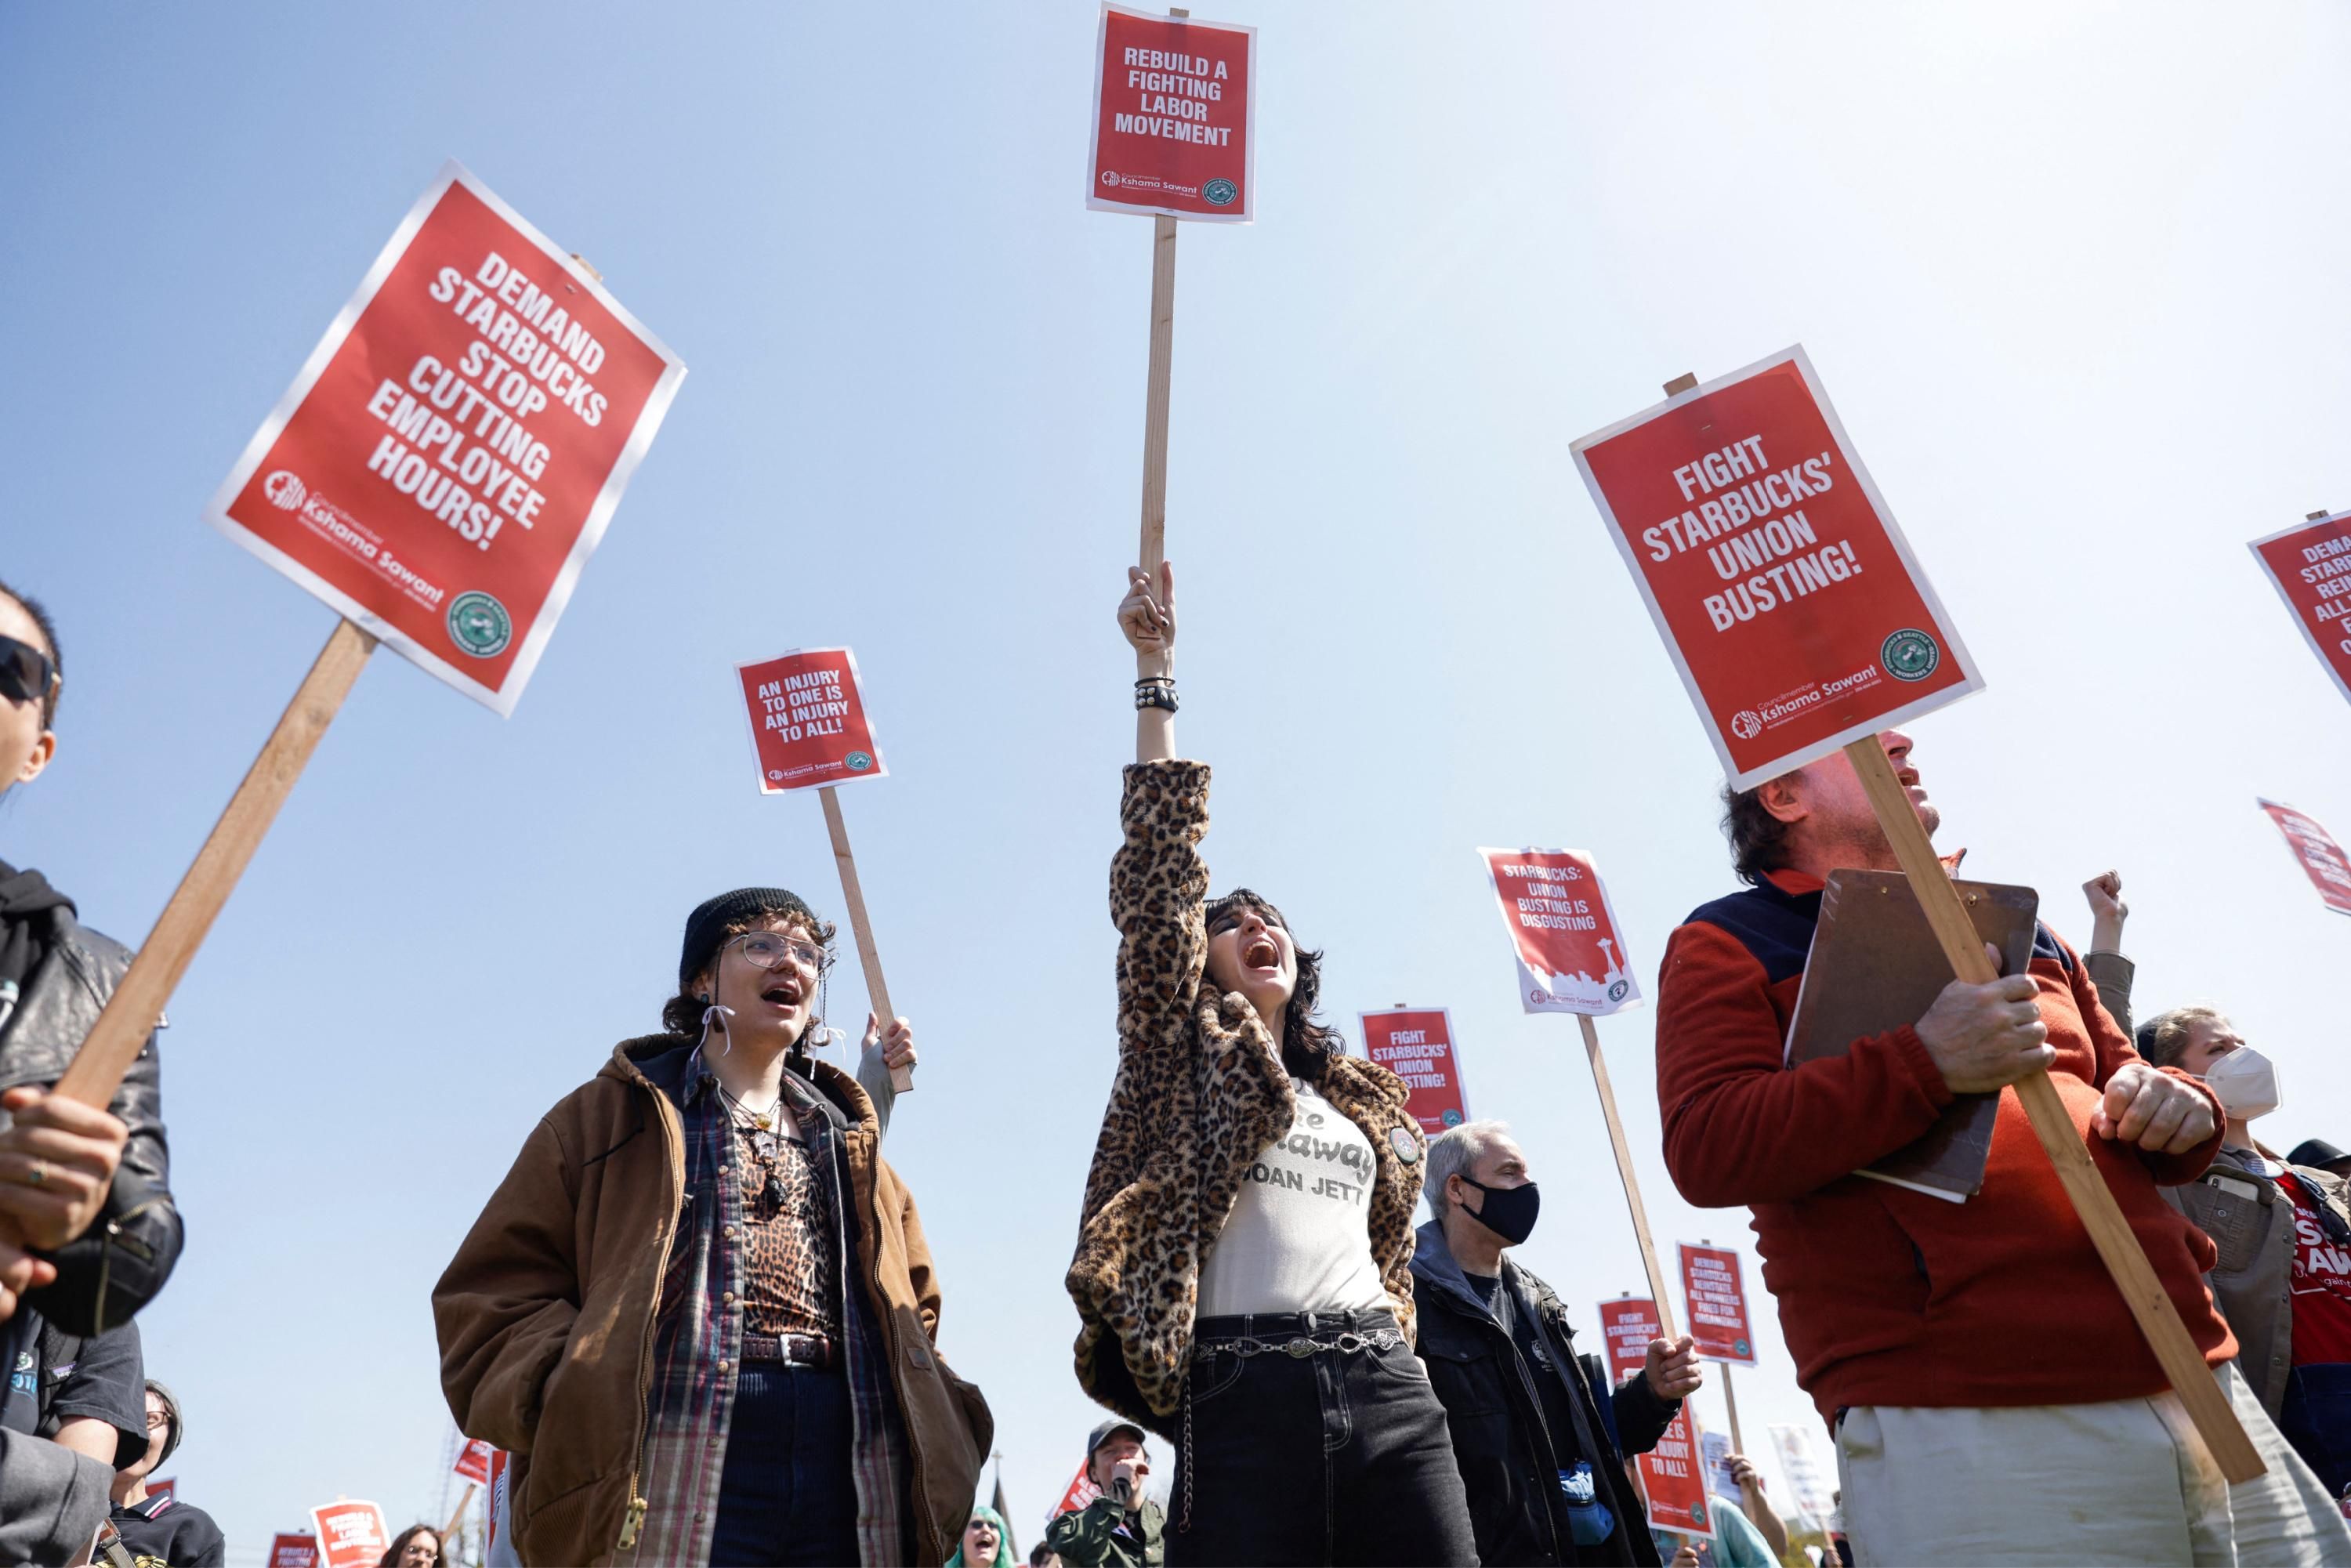 Demonstrators attend a rally against Starbucks union-busting